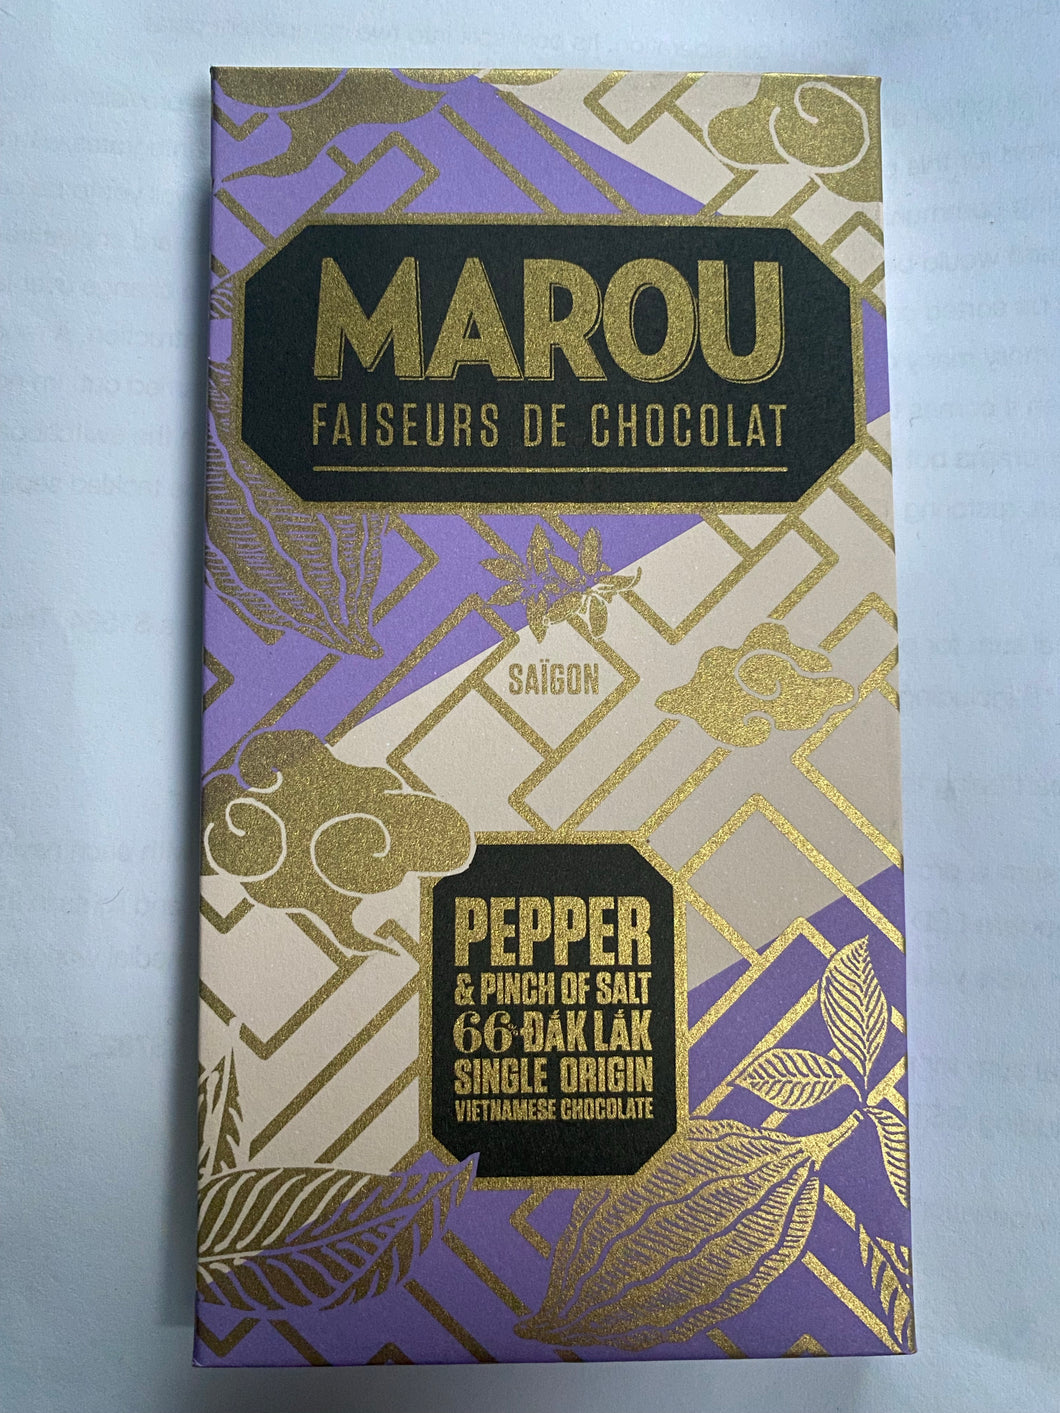 MAROU - Dâk Lâk 66% with Pepper and a pinch of salt